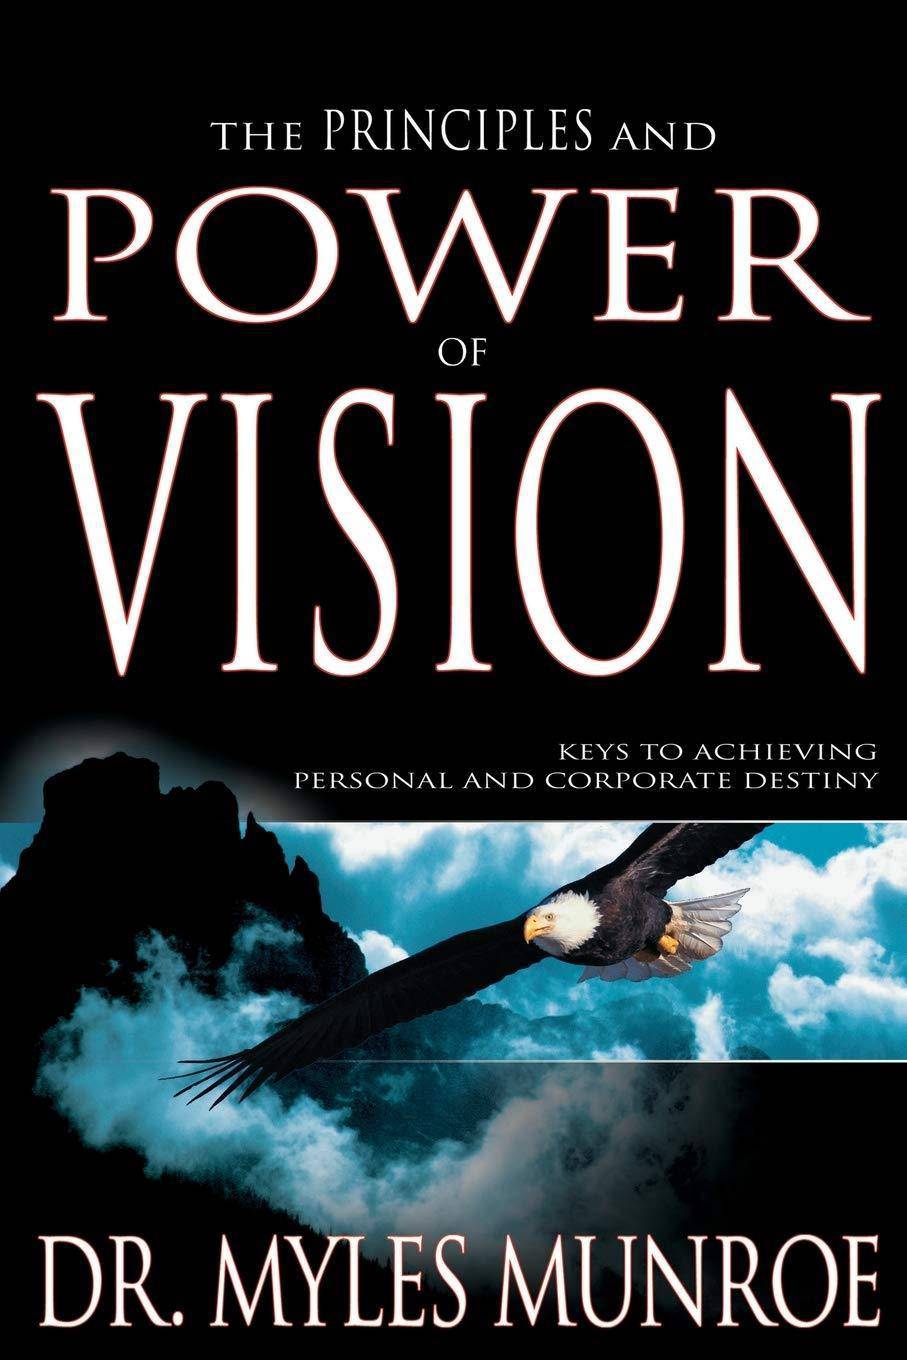 The Principles And Power Of Vision - SureShot Books Publishing LLC